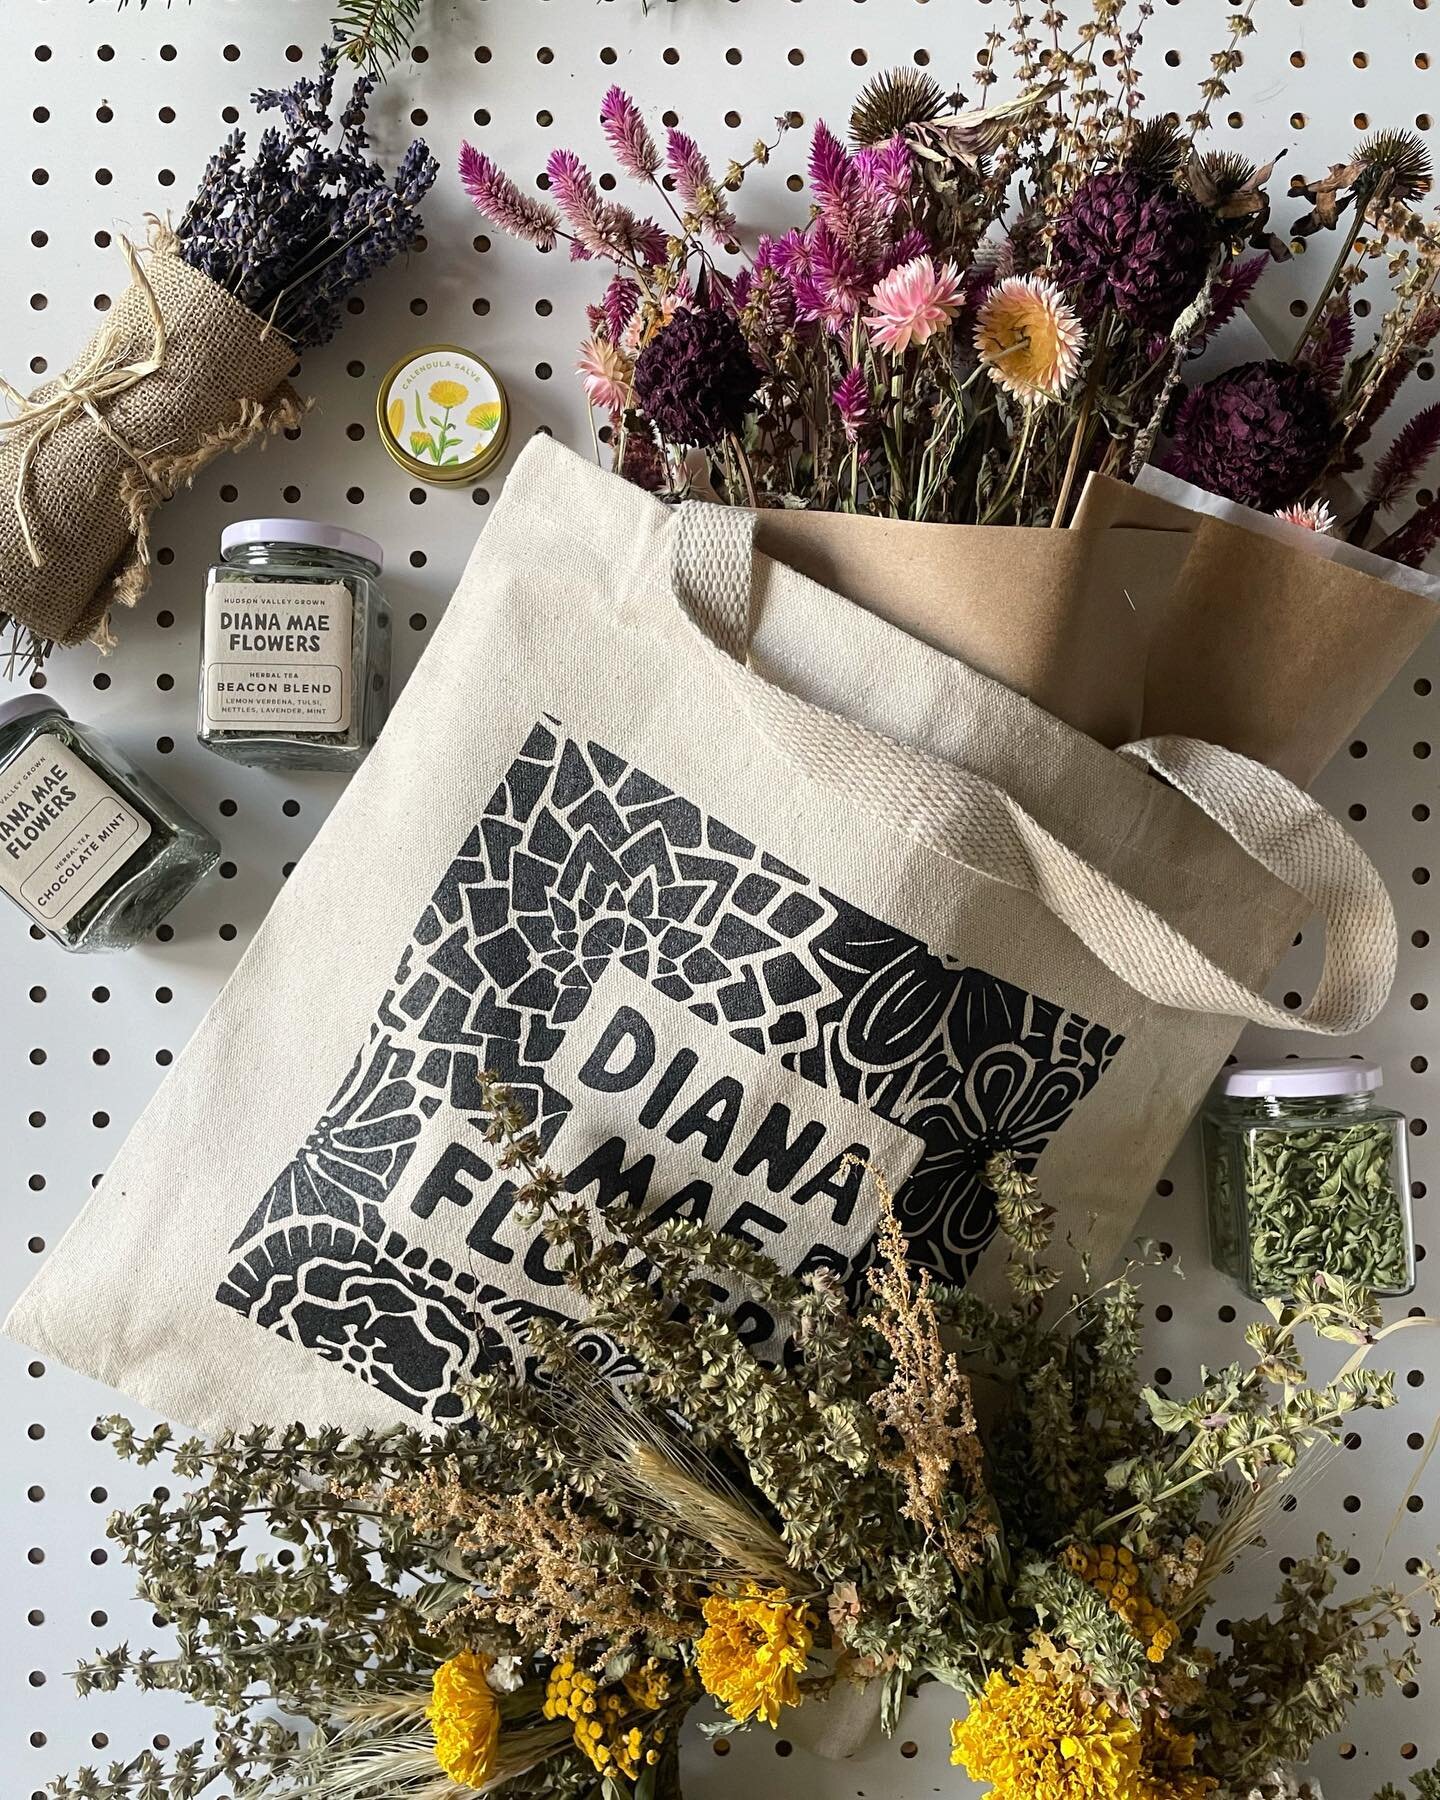 Welcome December, the season of gathering, giving, and slowing down. We&rsquo;ve got you covered for sweet and thoughtful flowery gifts for your loved ones or yourself! Wreaths, dried bouquets, calendula salve, herbal tea blends- all made with flower